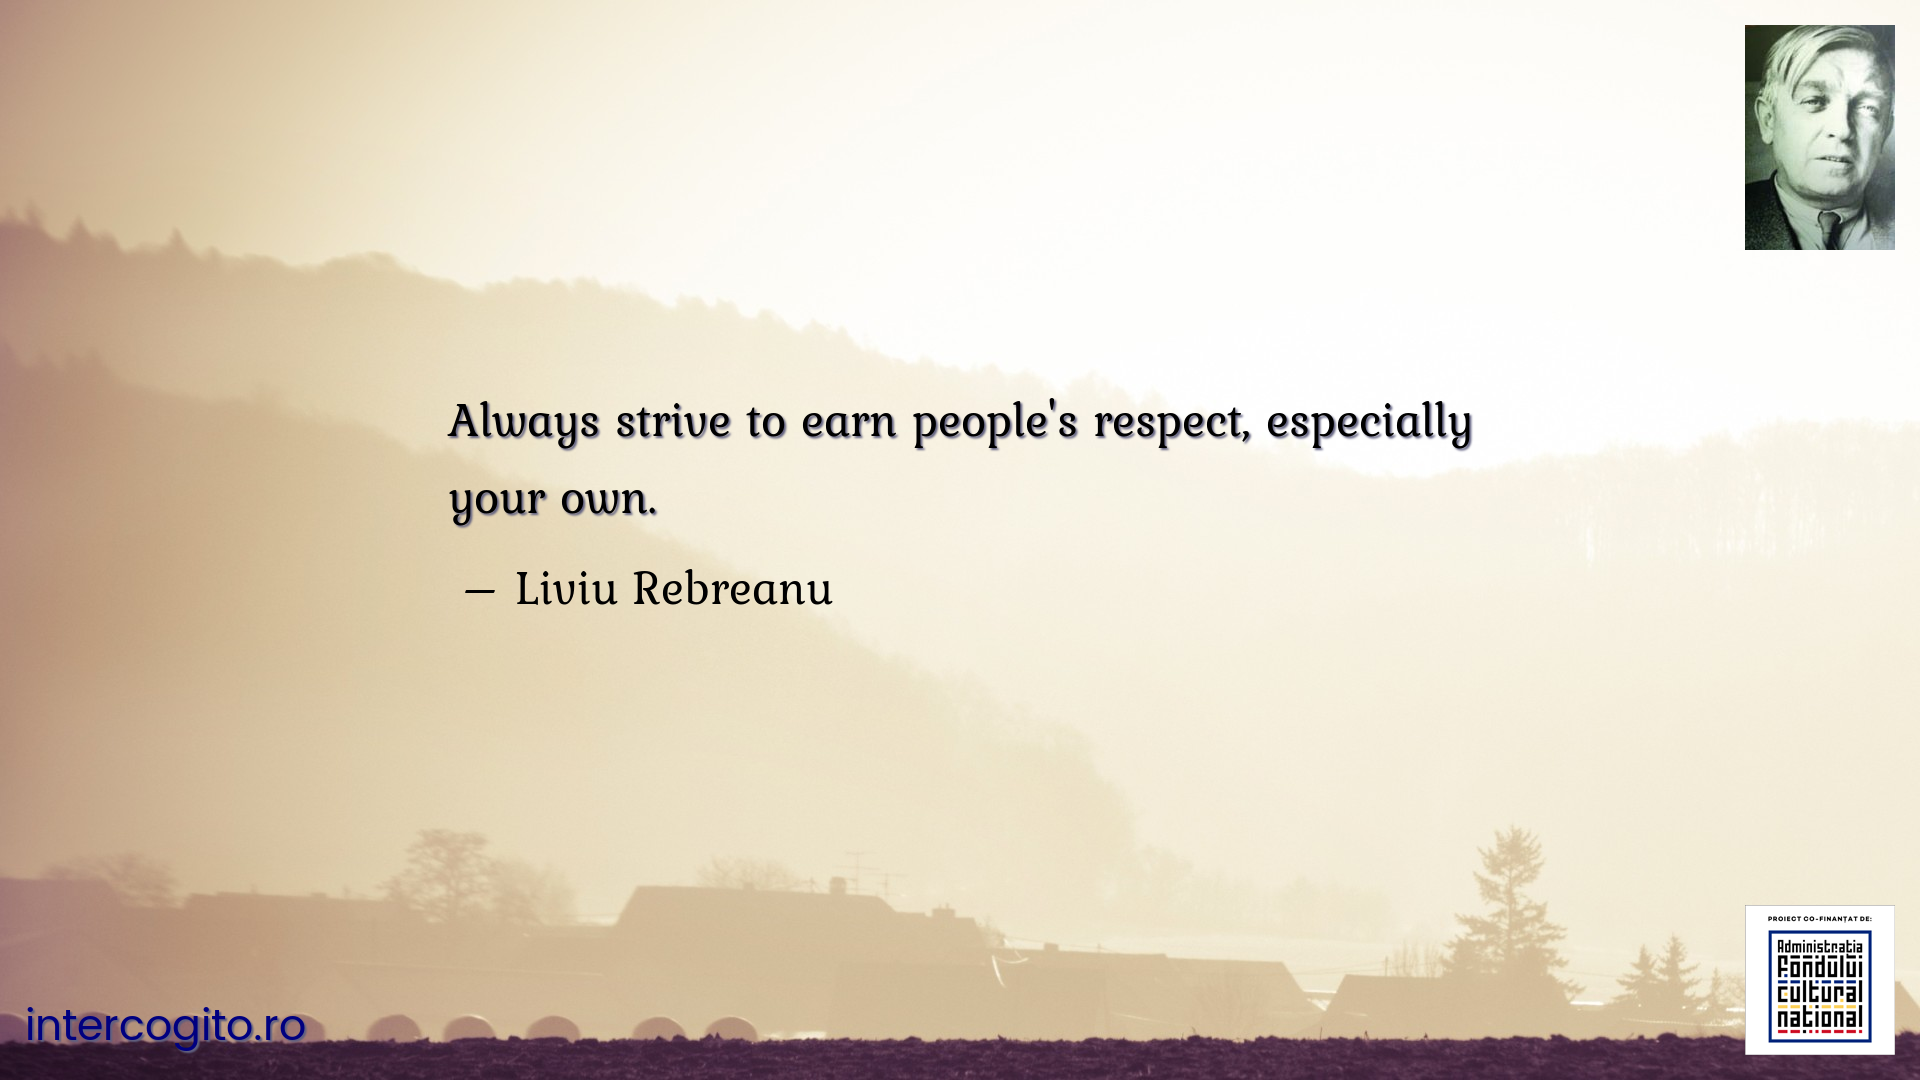 Always strive to earn people's respect, especially your own.